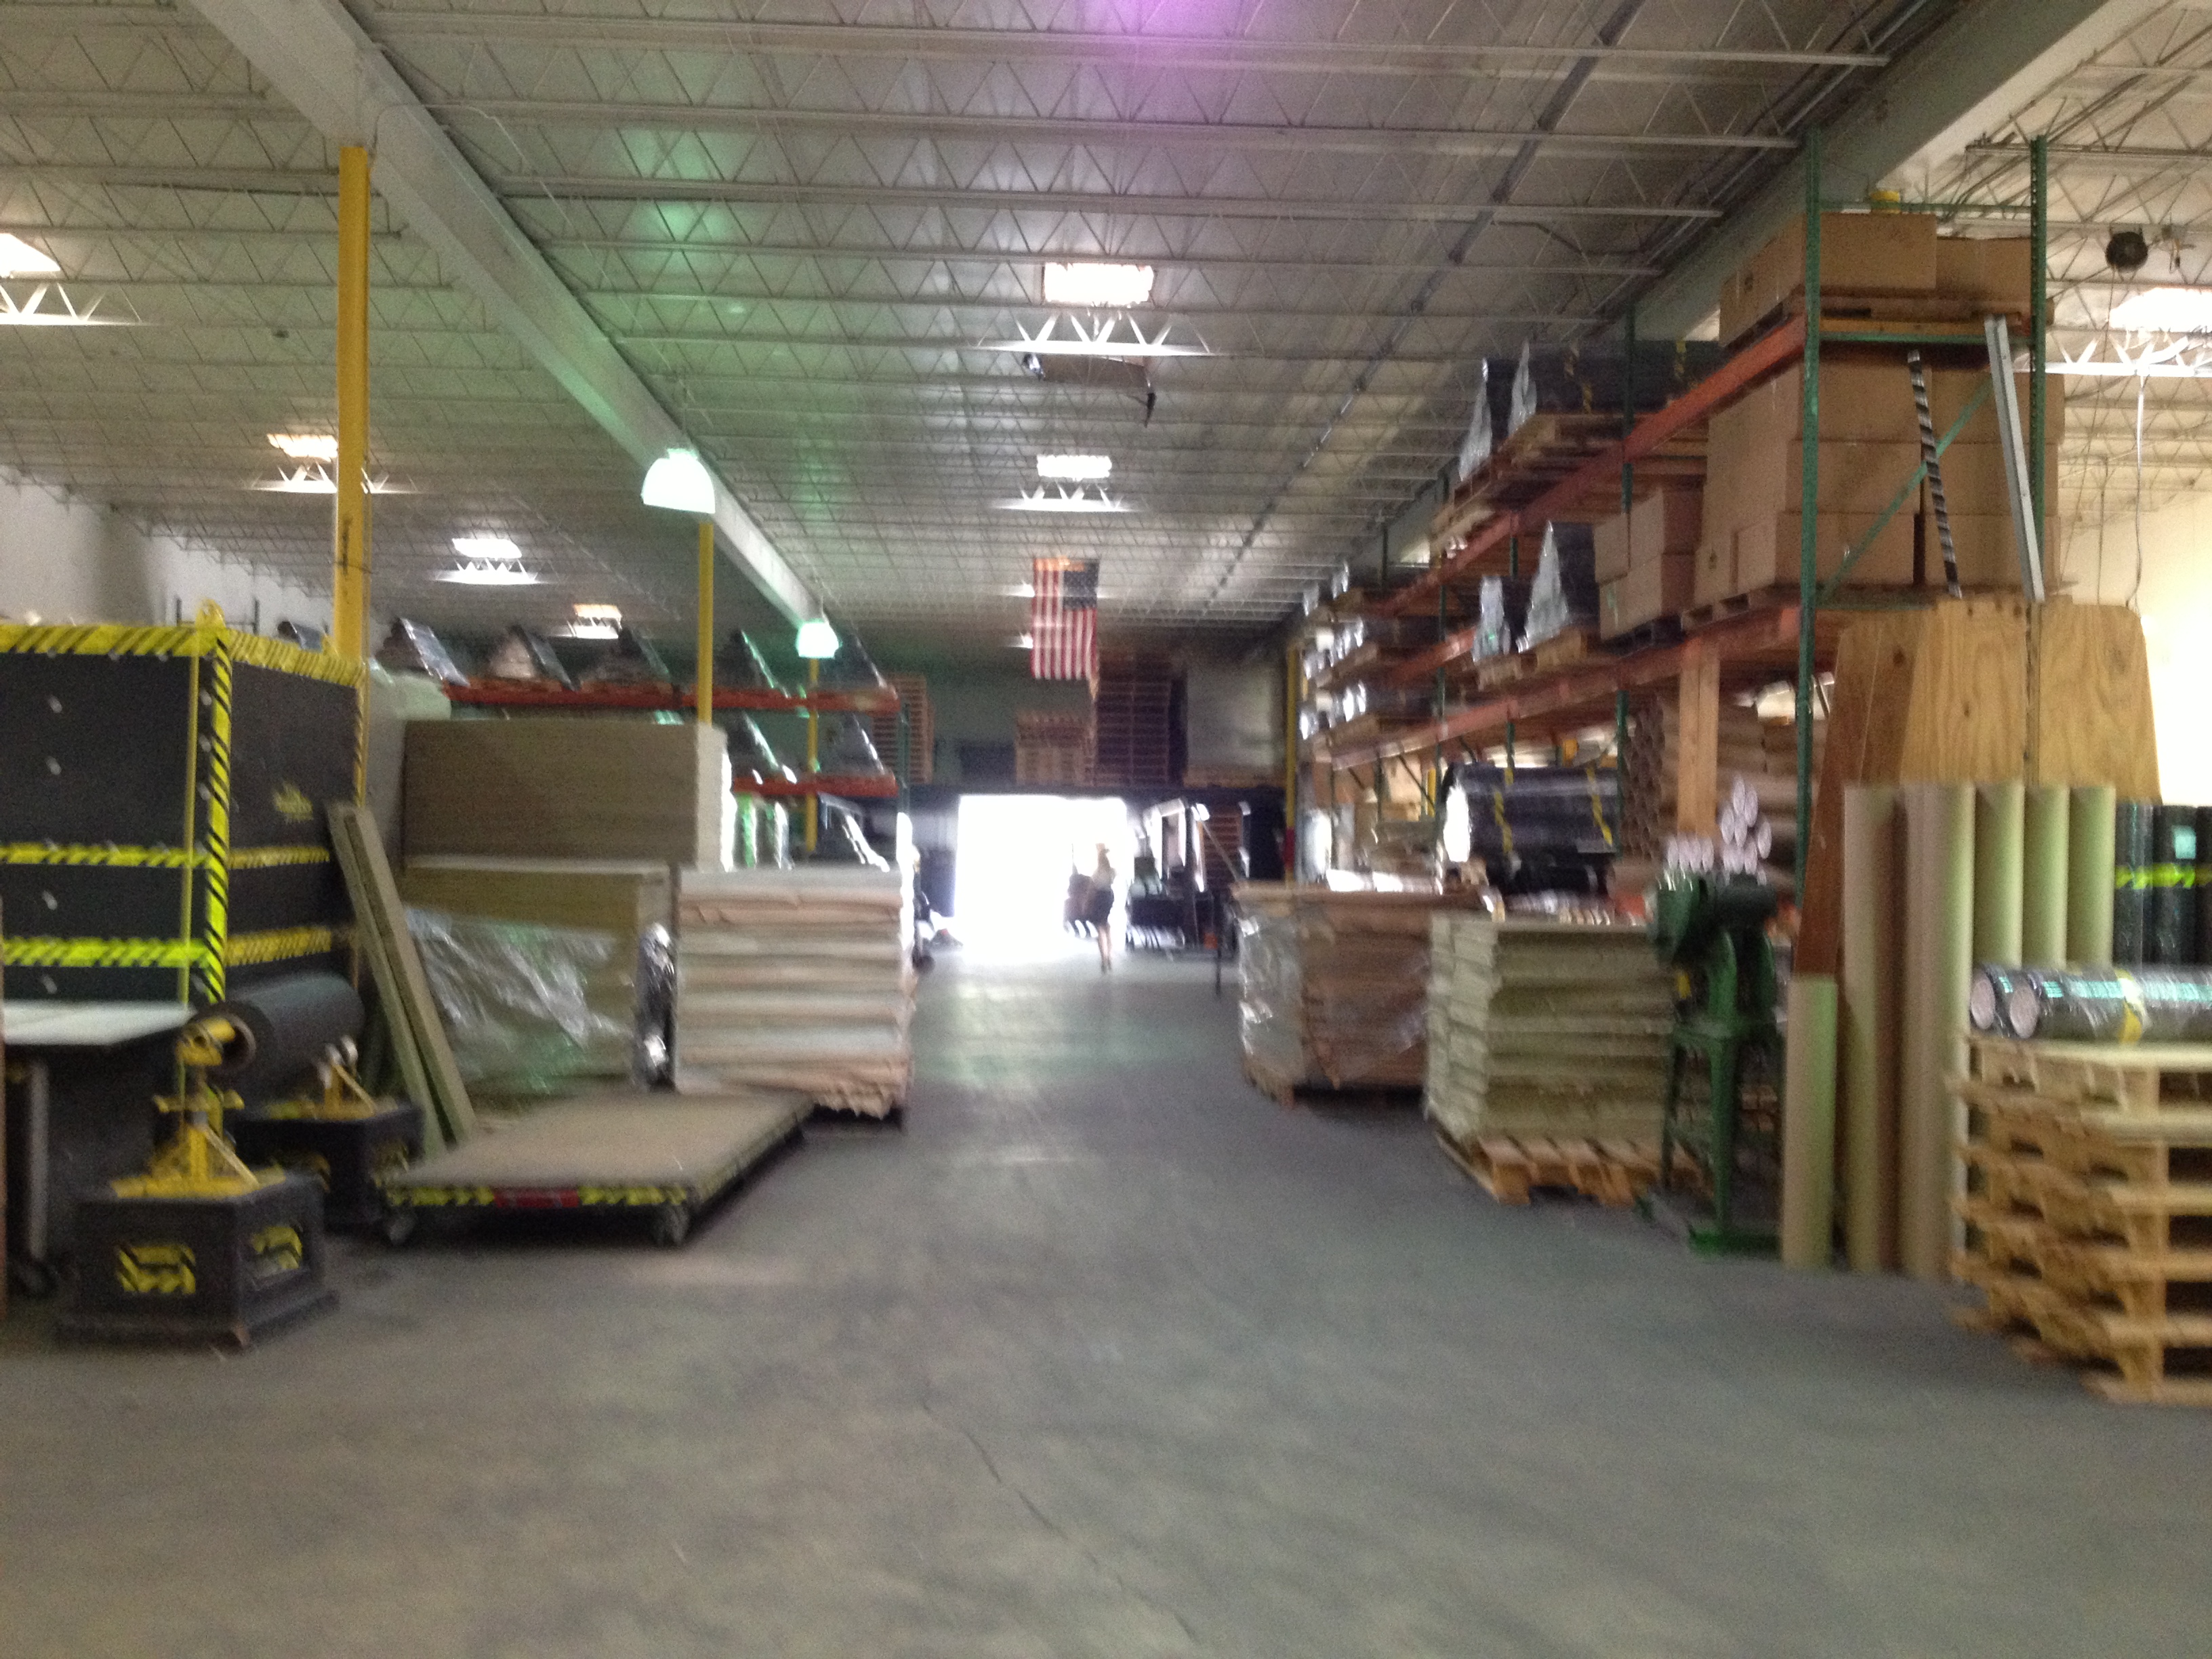 Acoustiblok's Facility in Tampa